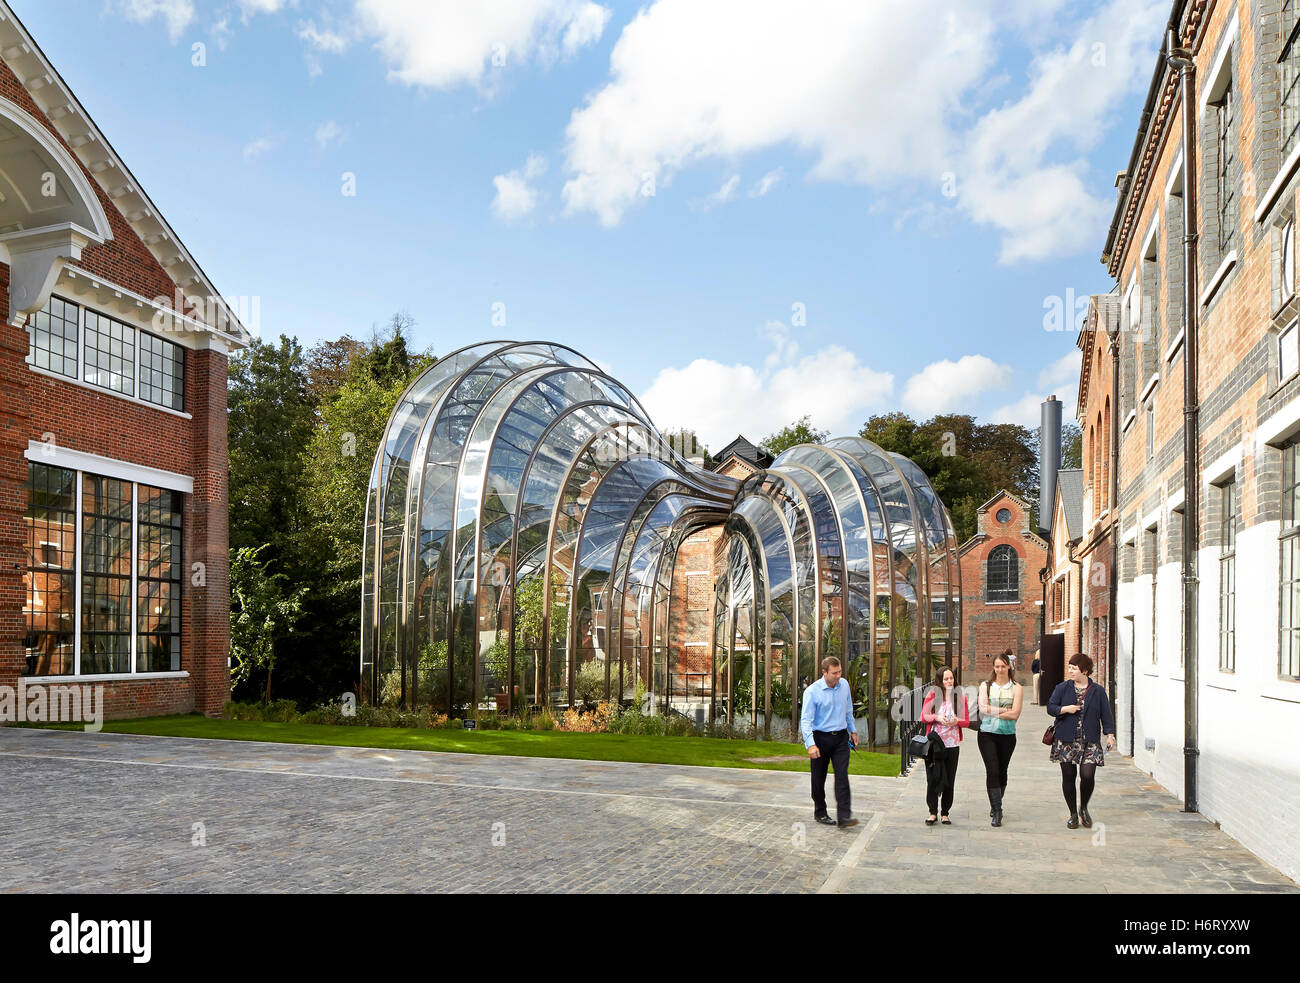 Historic mill site with curving greenhouse additions. Bombay Sapphire Distillery, Laverstoke, United Kingdom. Architect: Heatherwick, 2014. Stock Photo